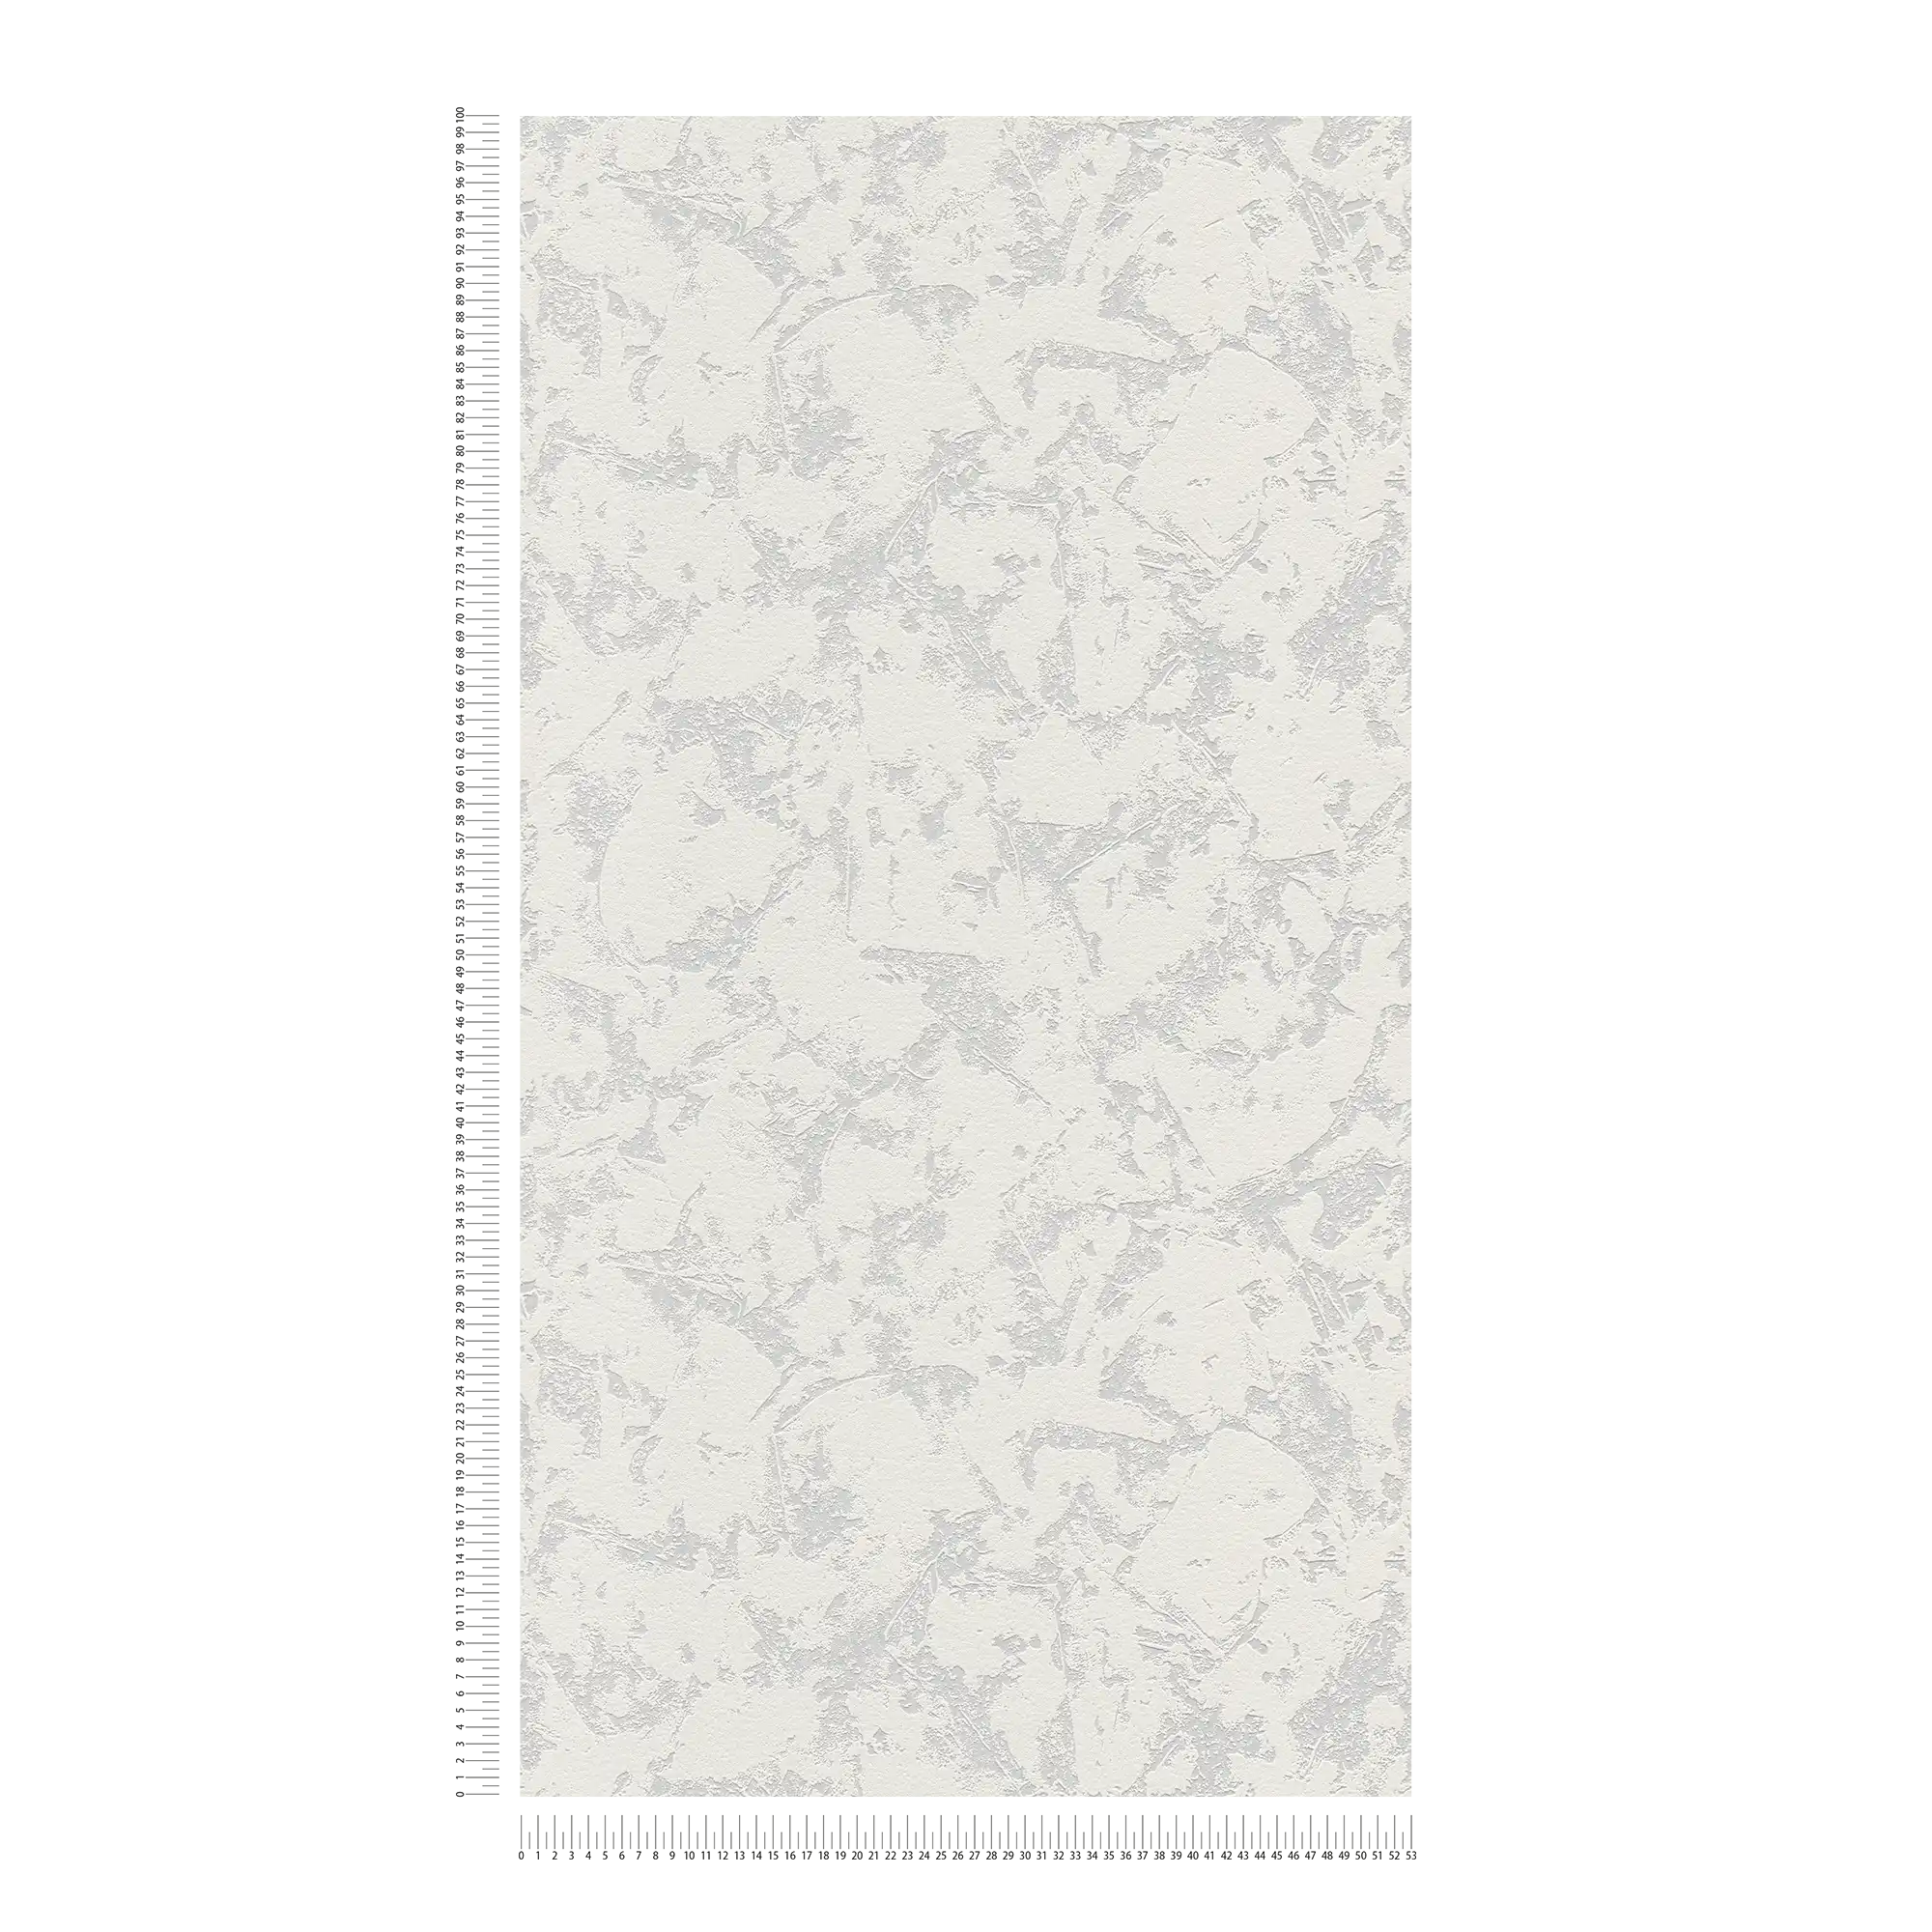             Foam structure wallpaper paintable with plaster look
        